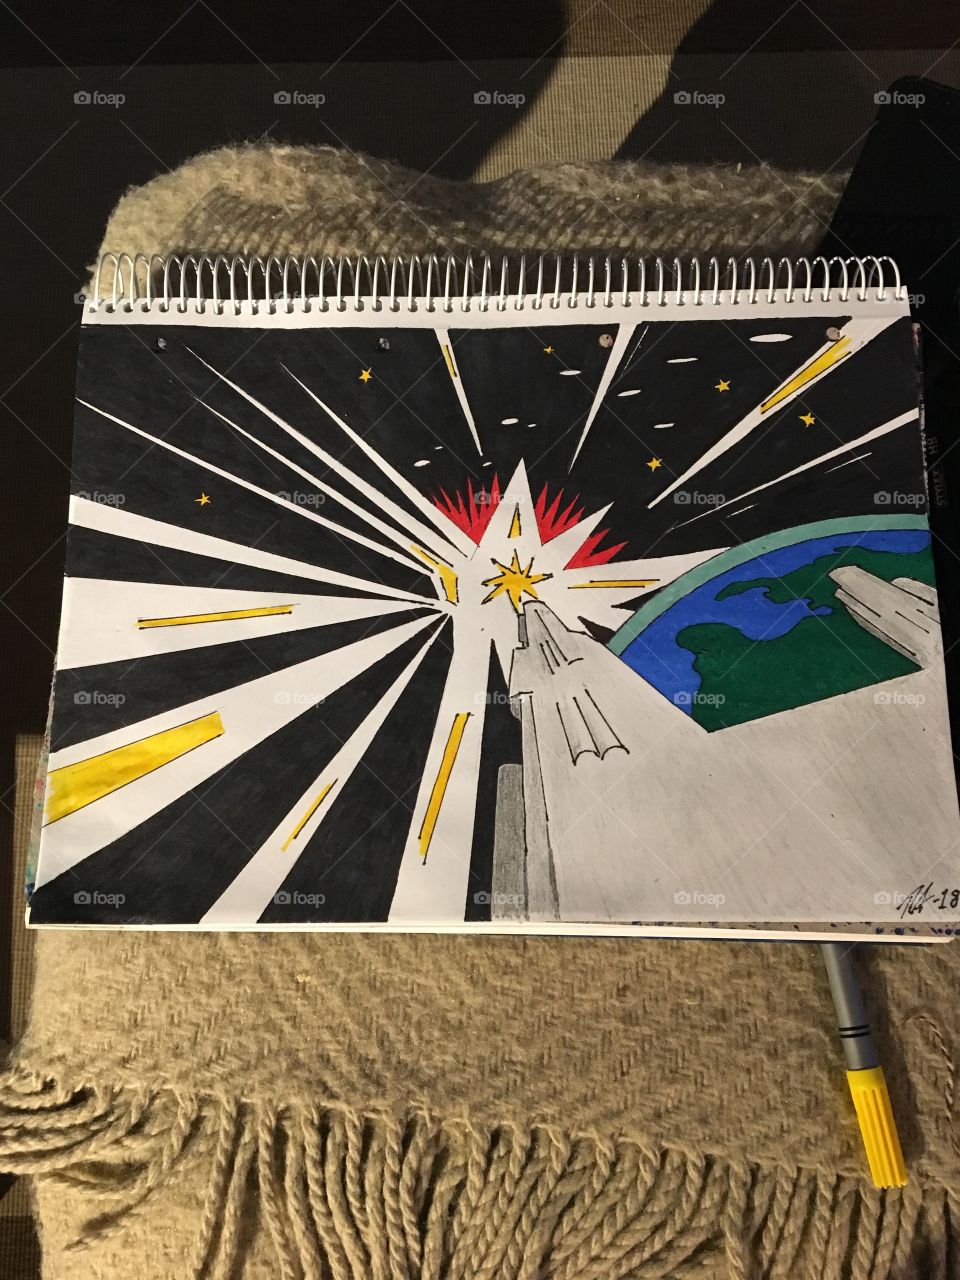 A drawing I have done. Space picture. Space ship. Star. Planet. Science fiction. Comic